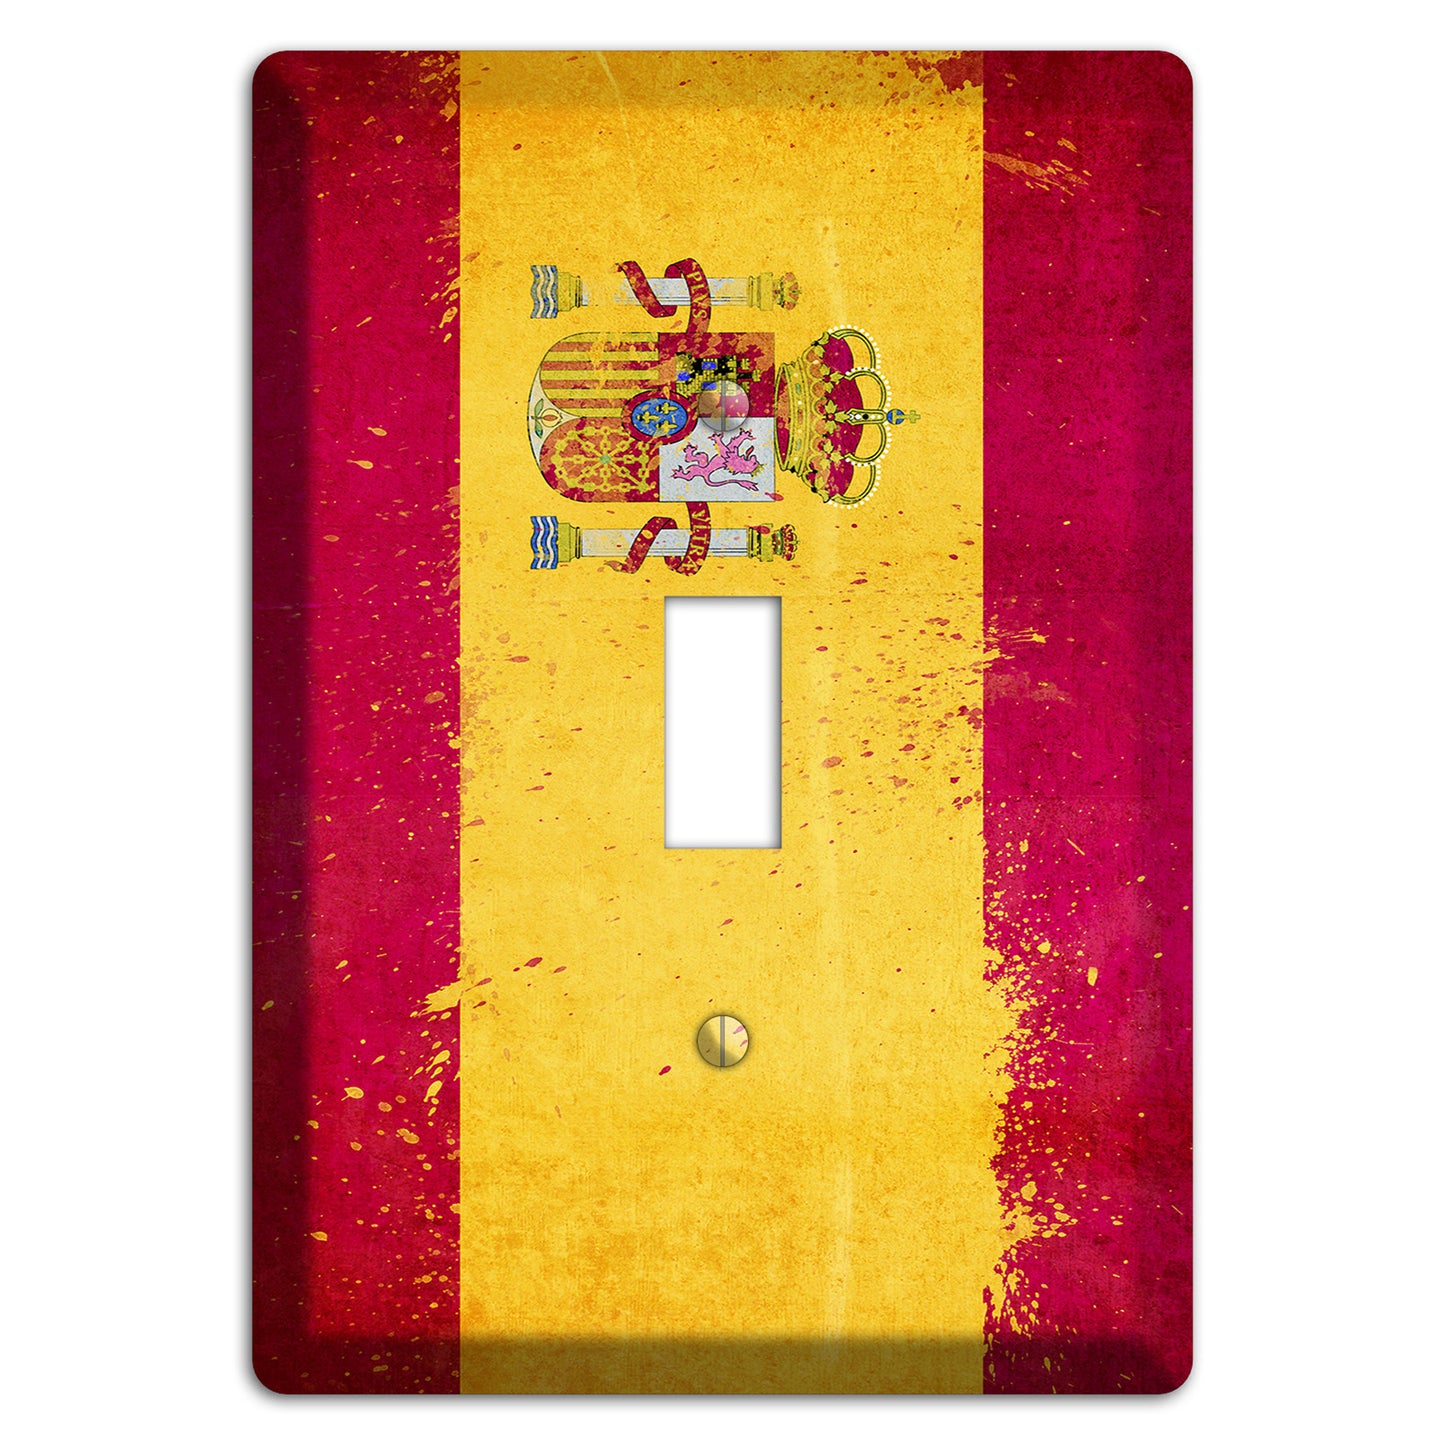 Spain Cover Plates Cover Plates